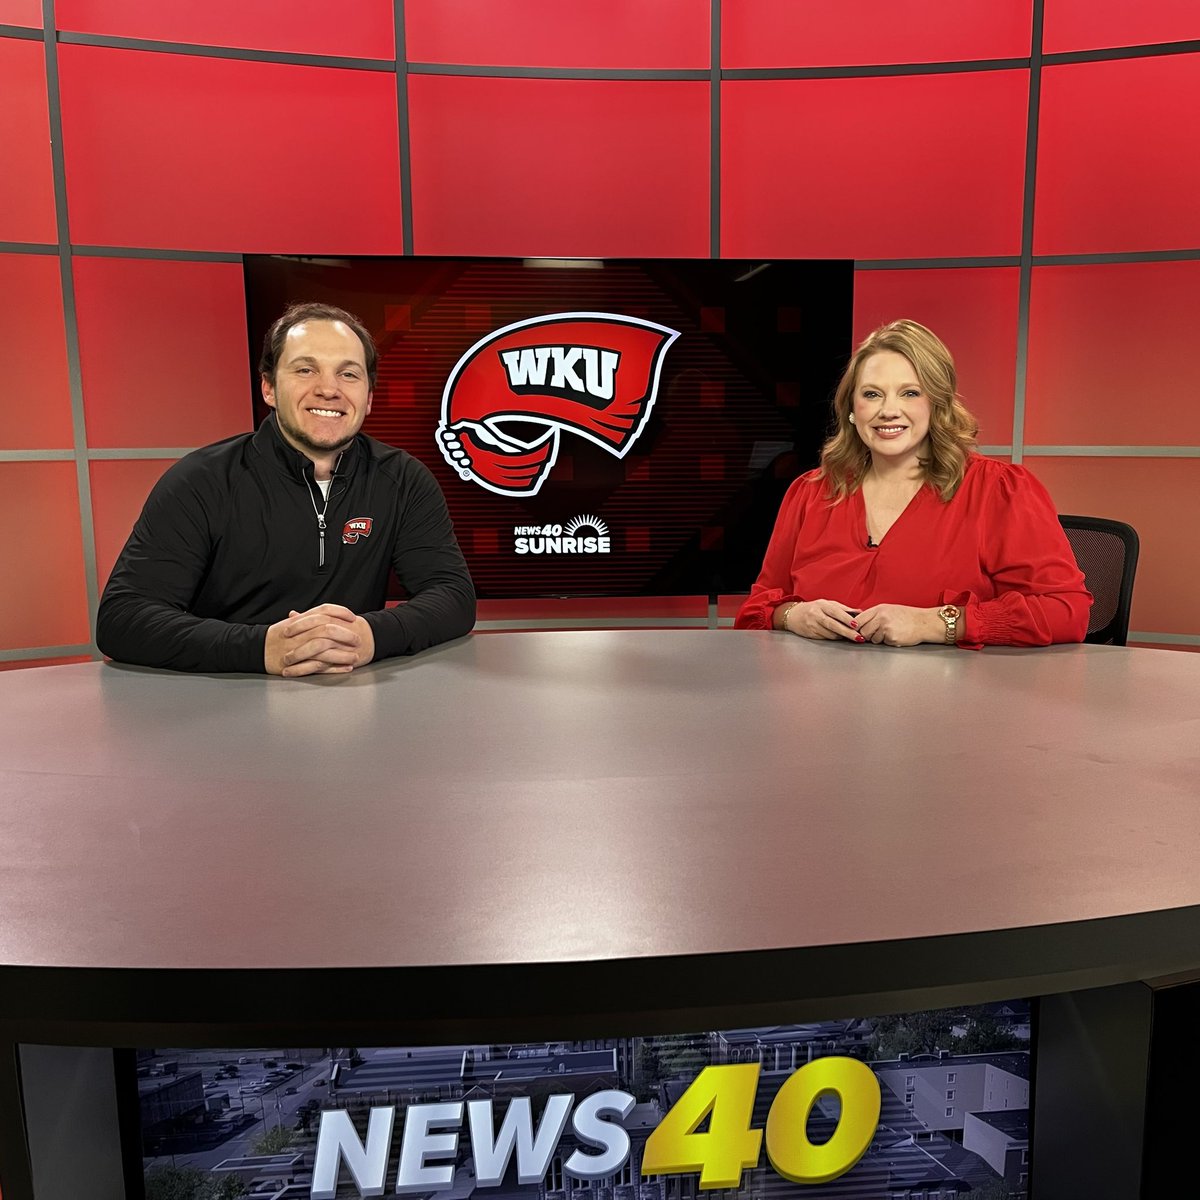 Thank you @wnkytv for having us on this morning! @CoachMizellWKU | #GoTops